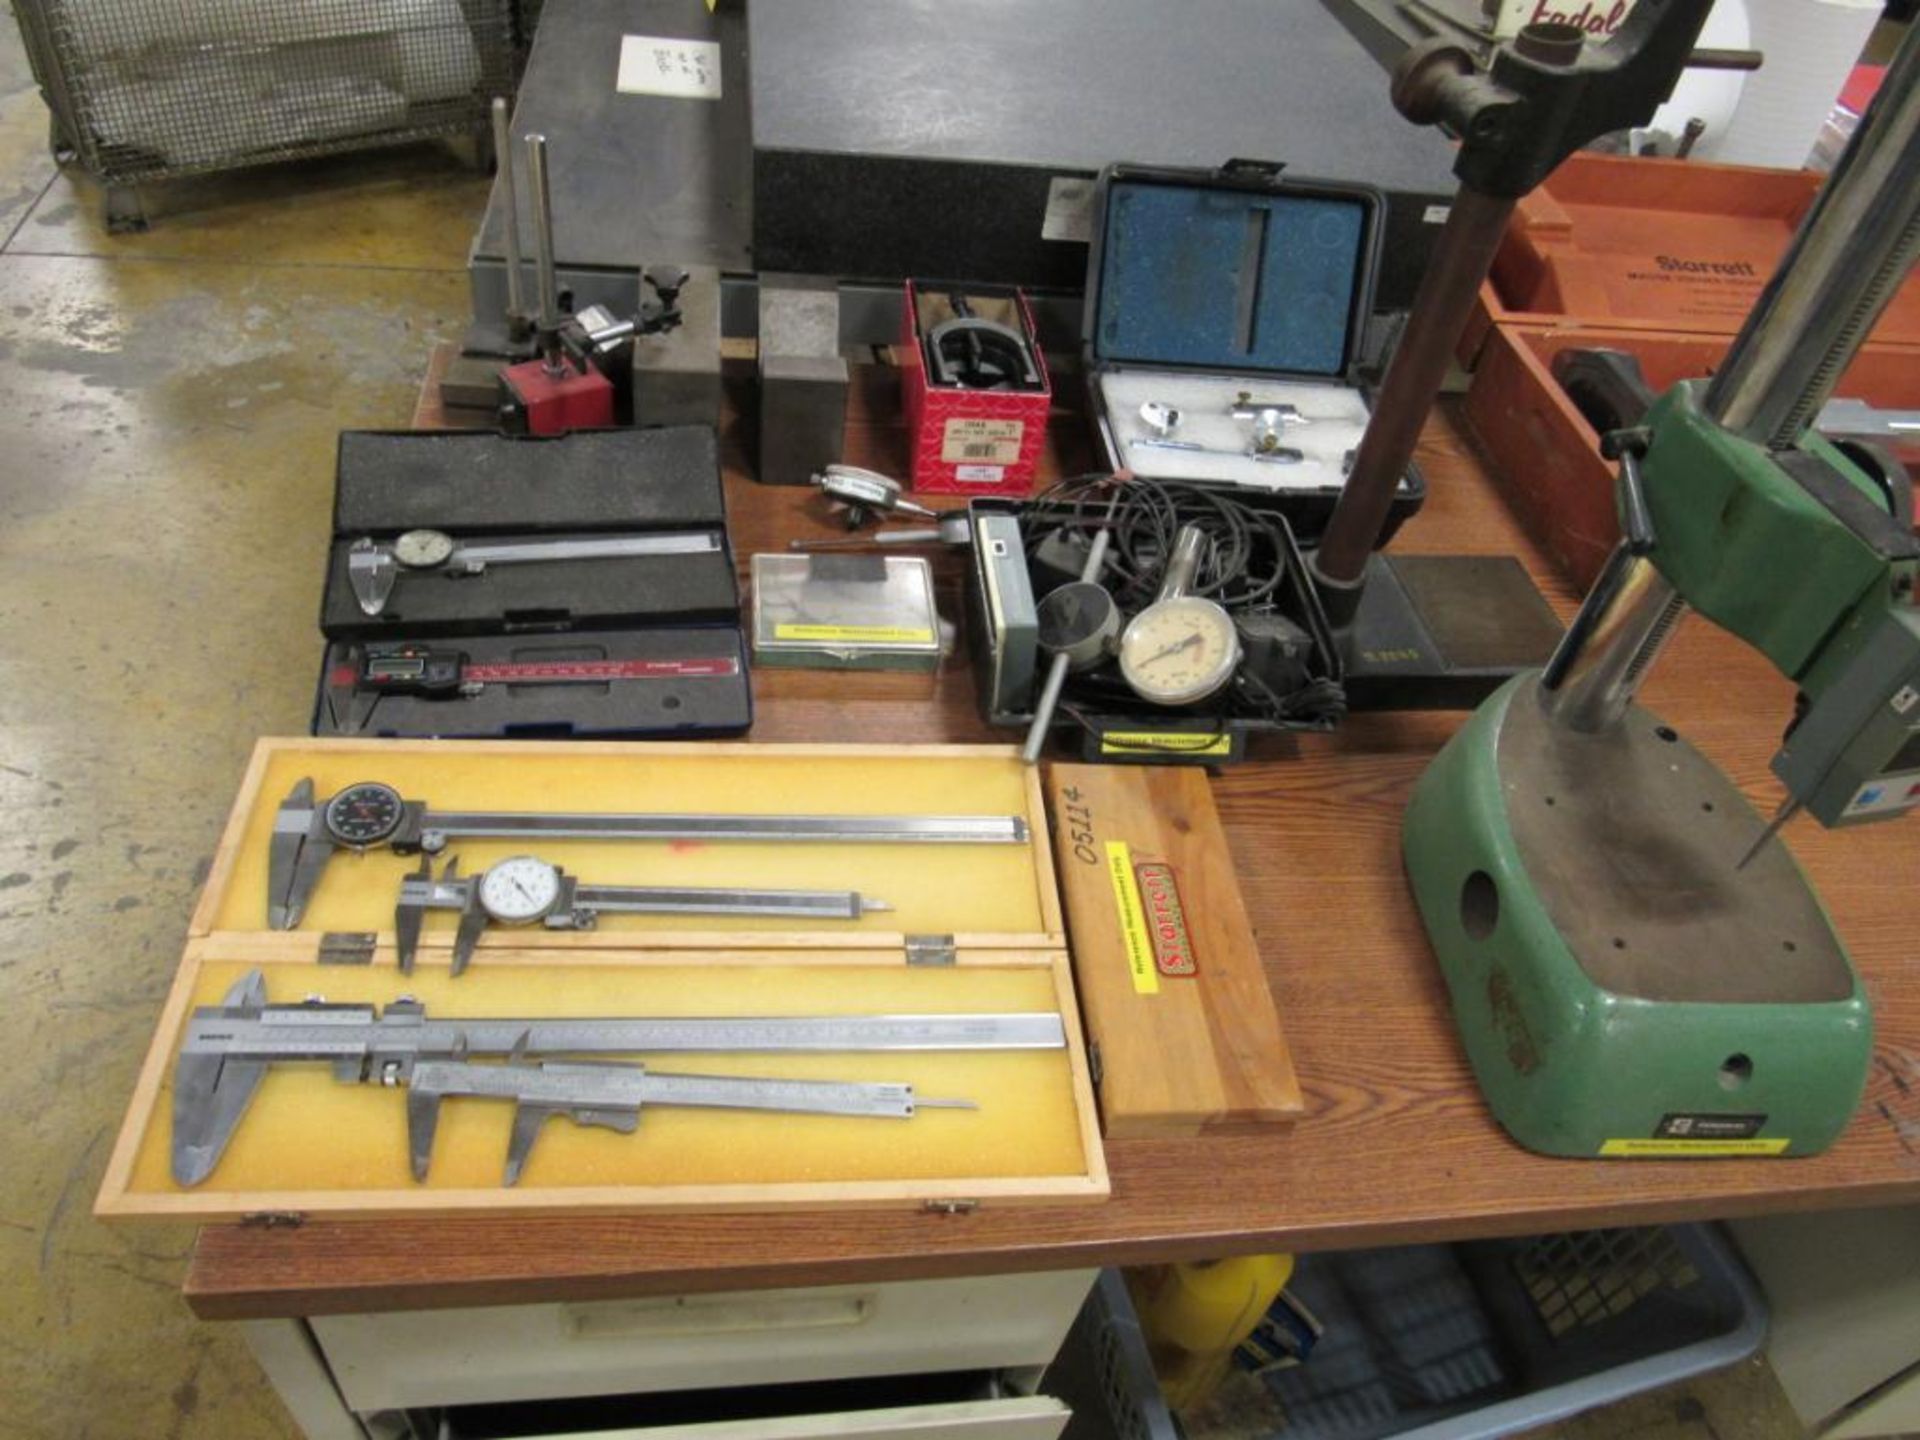 LOT: (1) Desk and (1) 32 in. x 60 in. Steel Work Bench with Inspection Equipment consisting of Assor